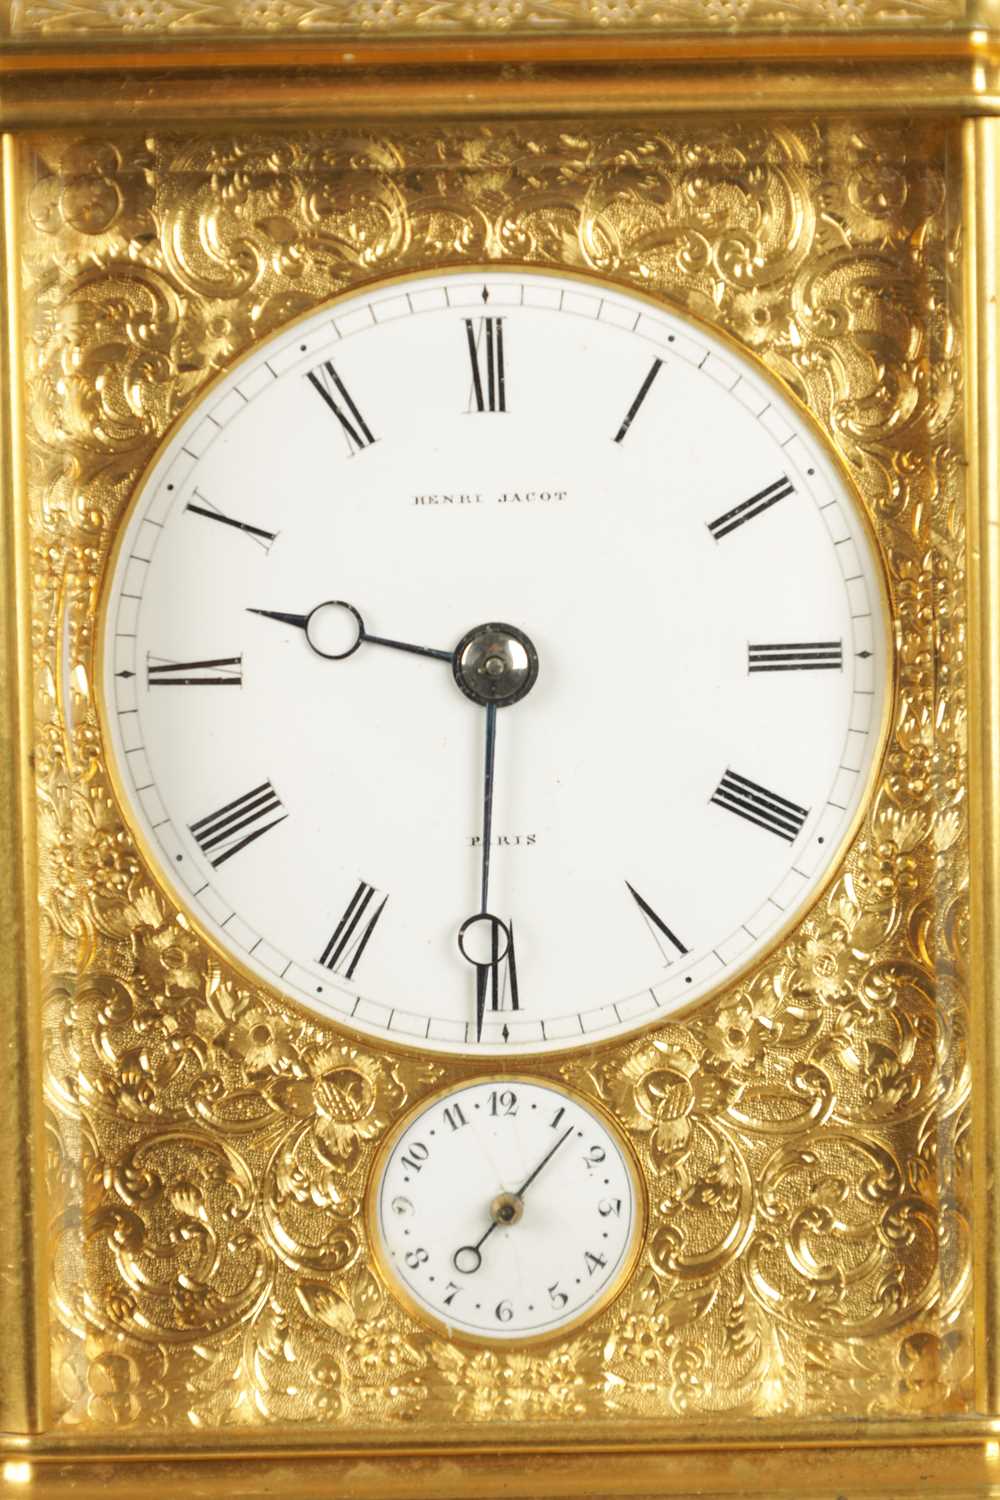 HENRI JACOT, PARIS. A LATE 19TH CENTURY FRENCH GRAND SONNERIE CARRIAGE CLOCK - Image 5 of 20